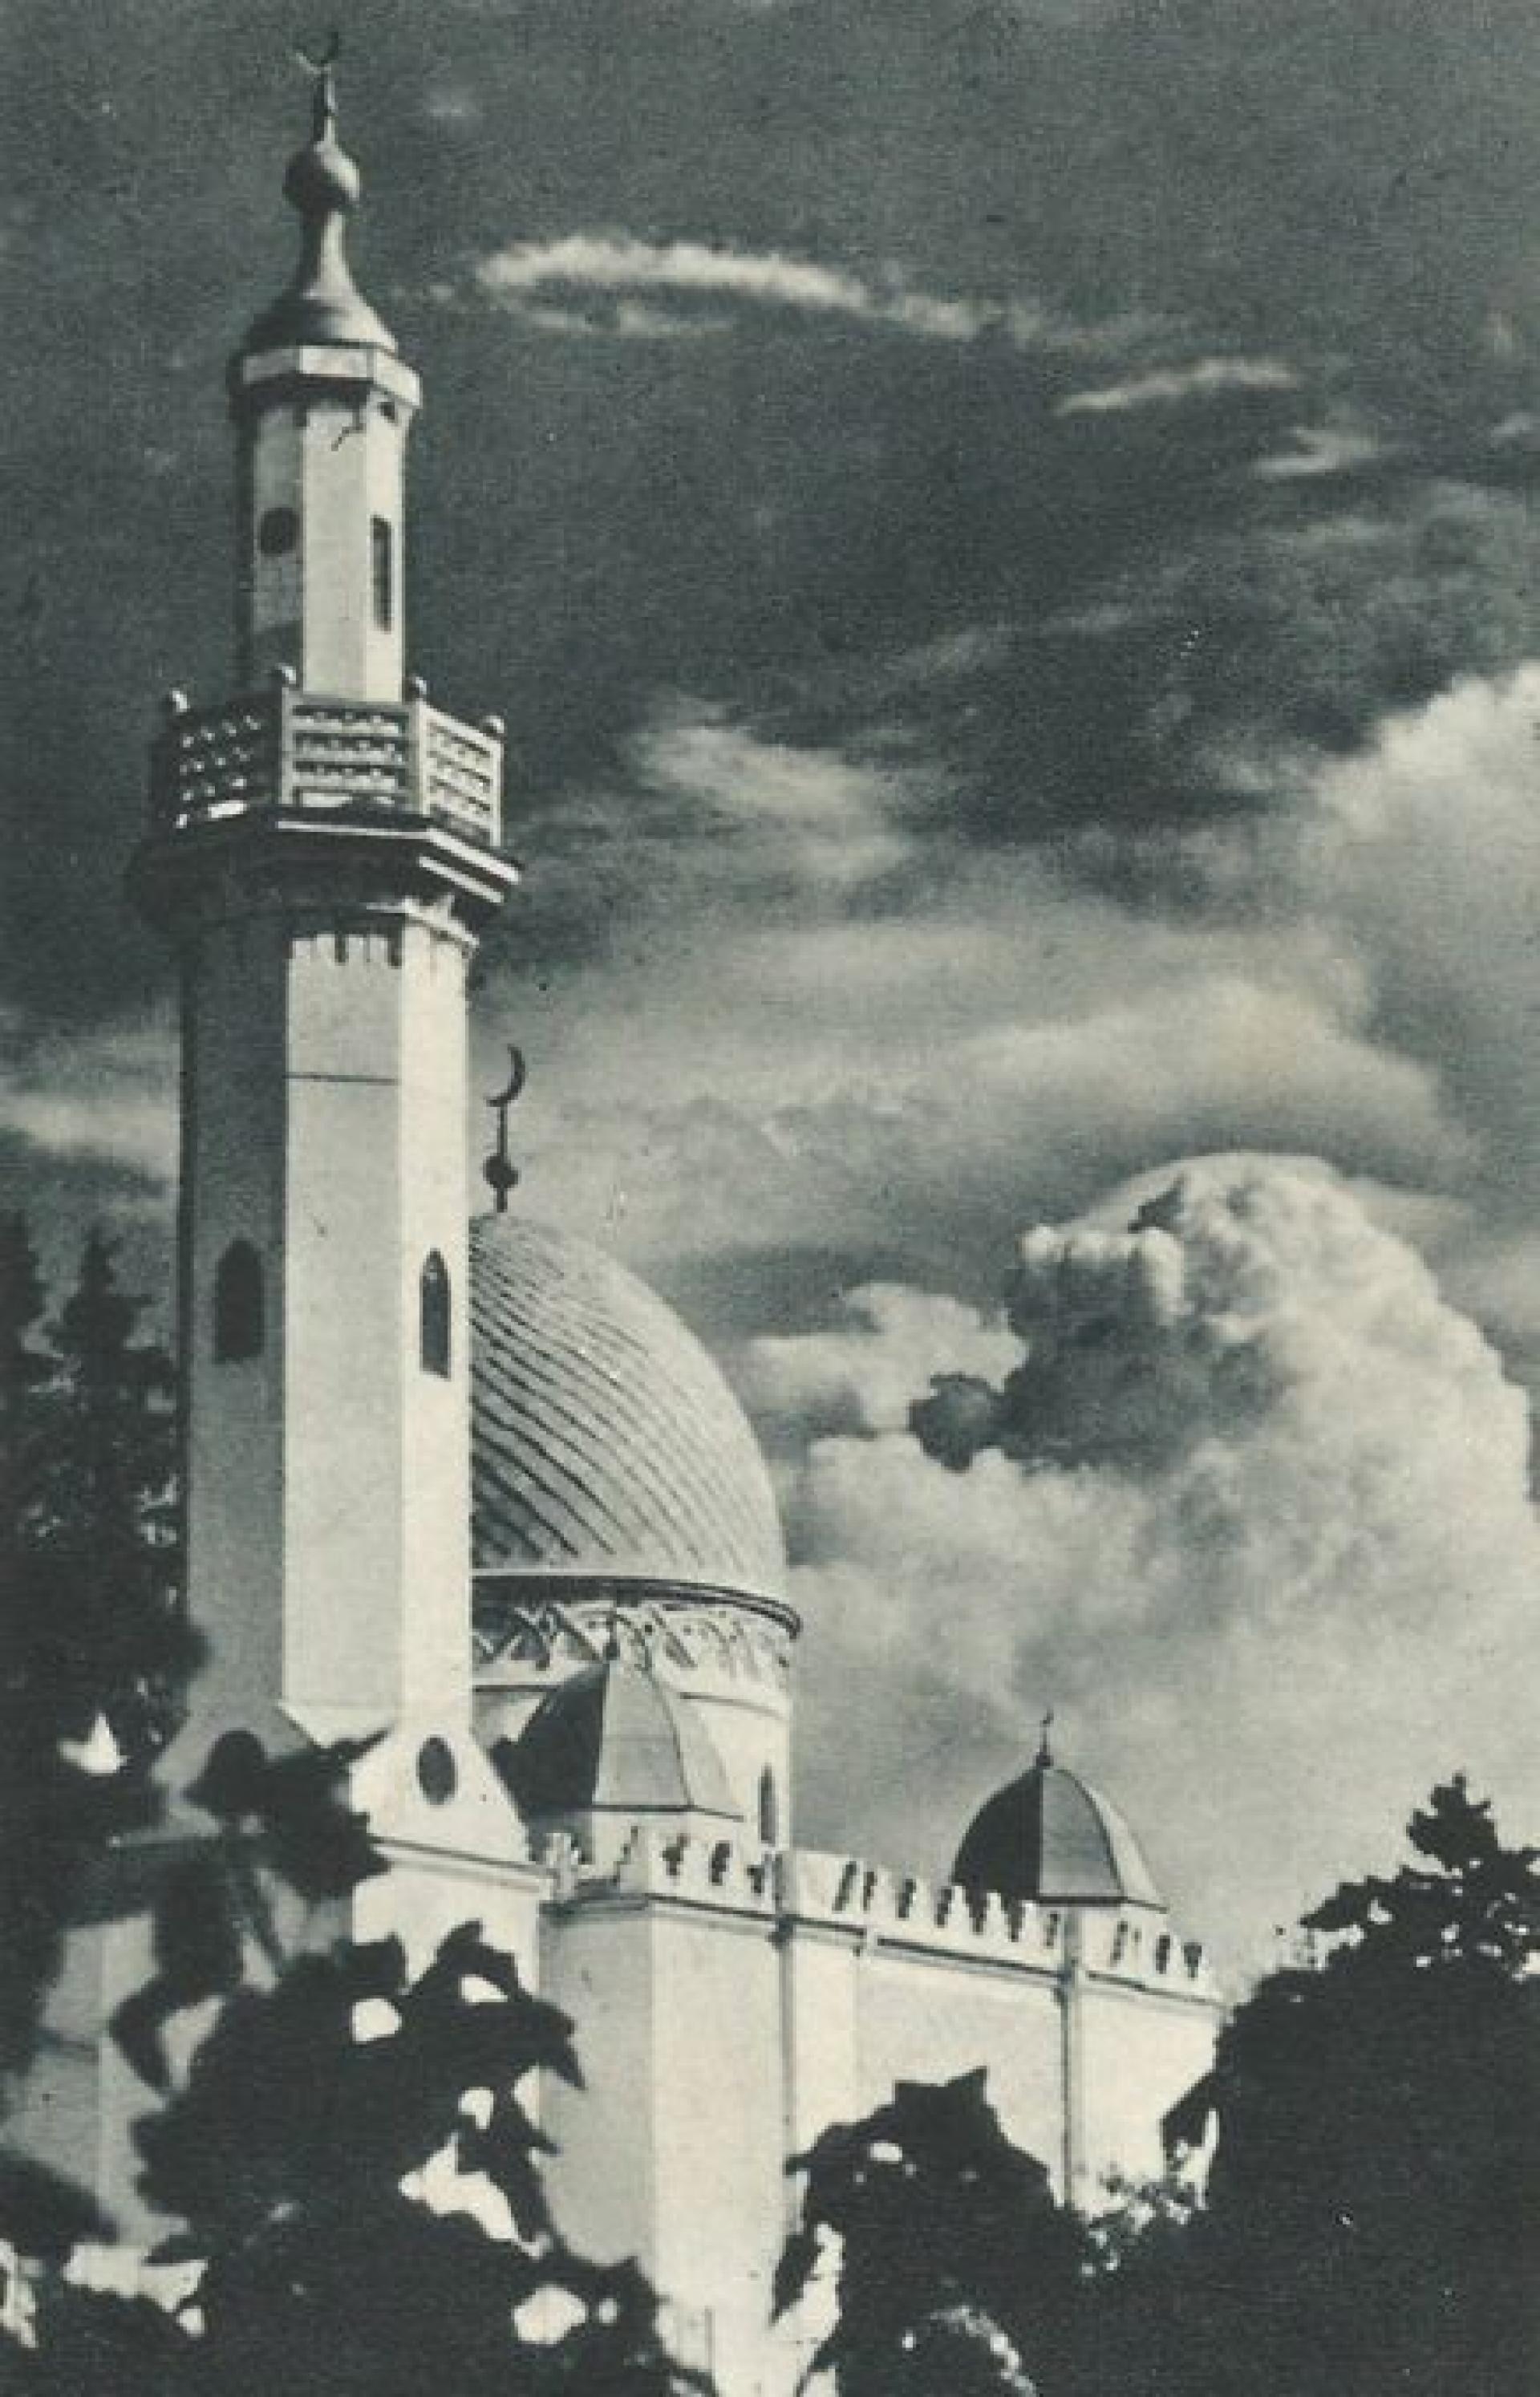 Kaunas had a wooden mosque built in 1860. | Source postcard from 1940s